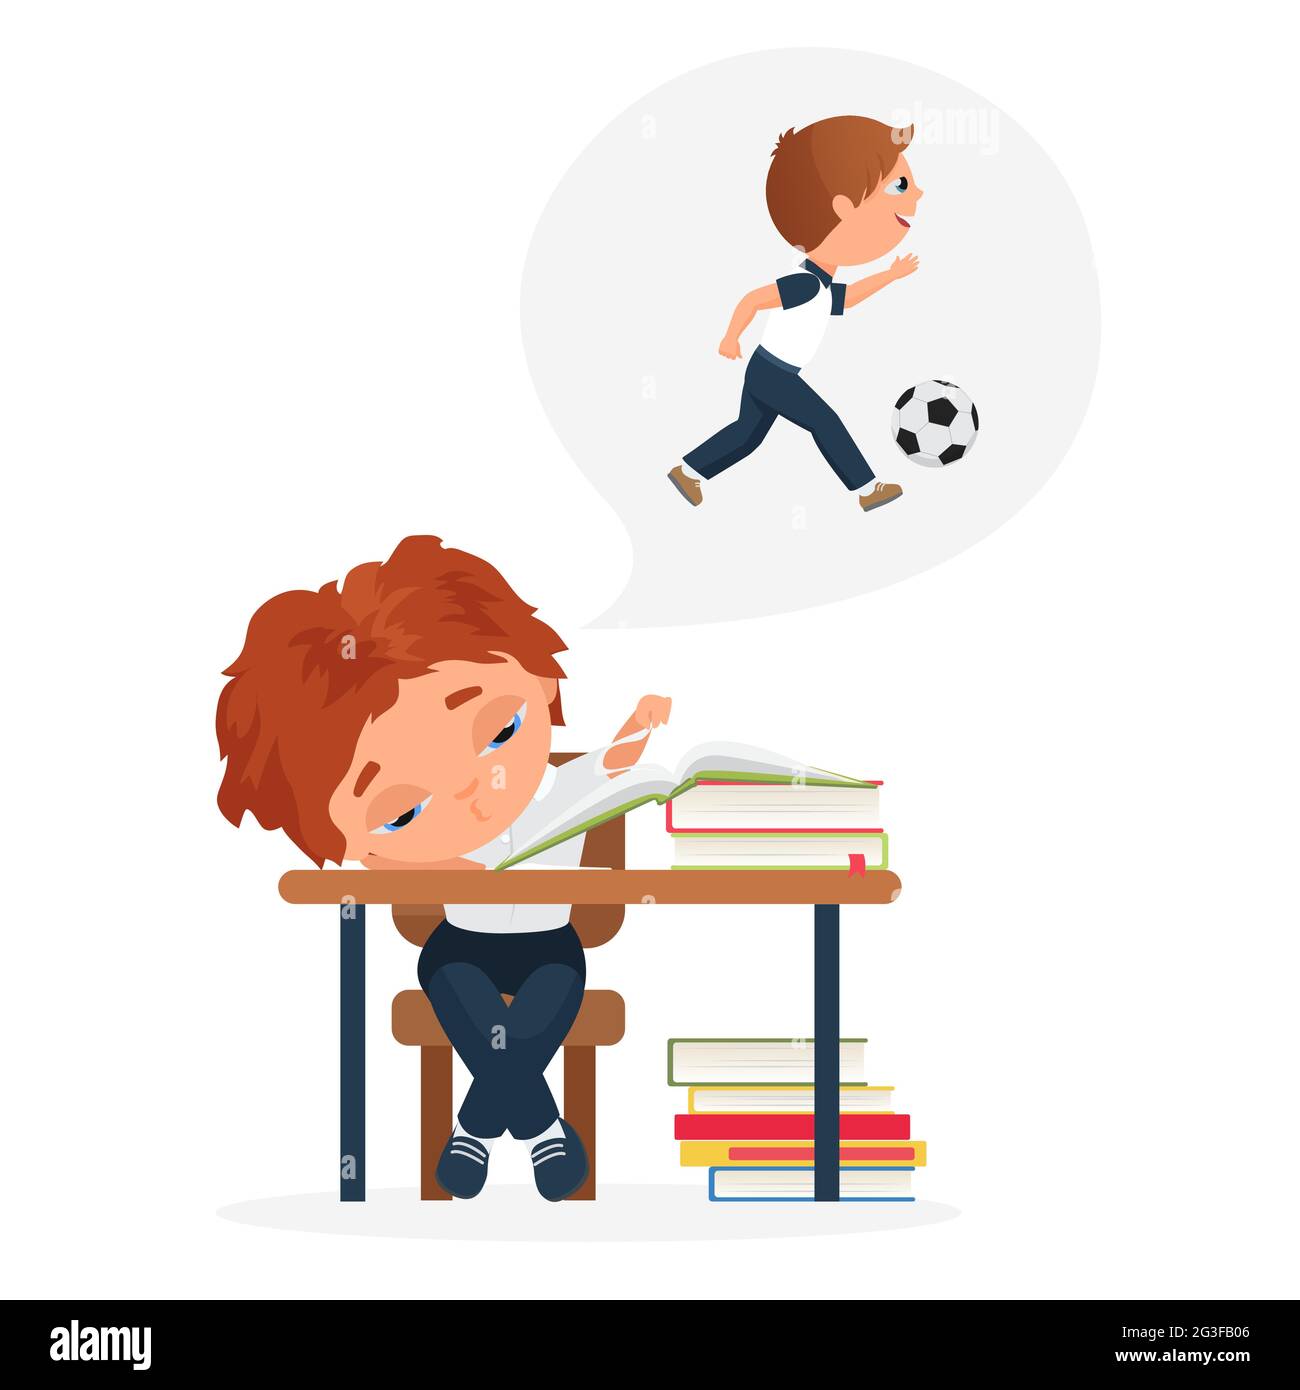 Children study hard, education problem of bored kid vector illustration.  Cartoon tired boy child character sitting at school books and studying  homework, dreaming of playing ball outdoors background Stock Vector Image &